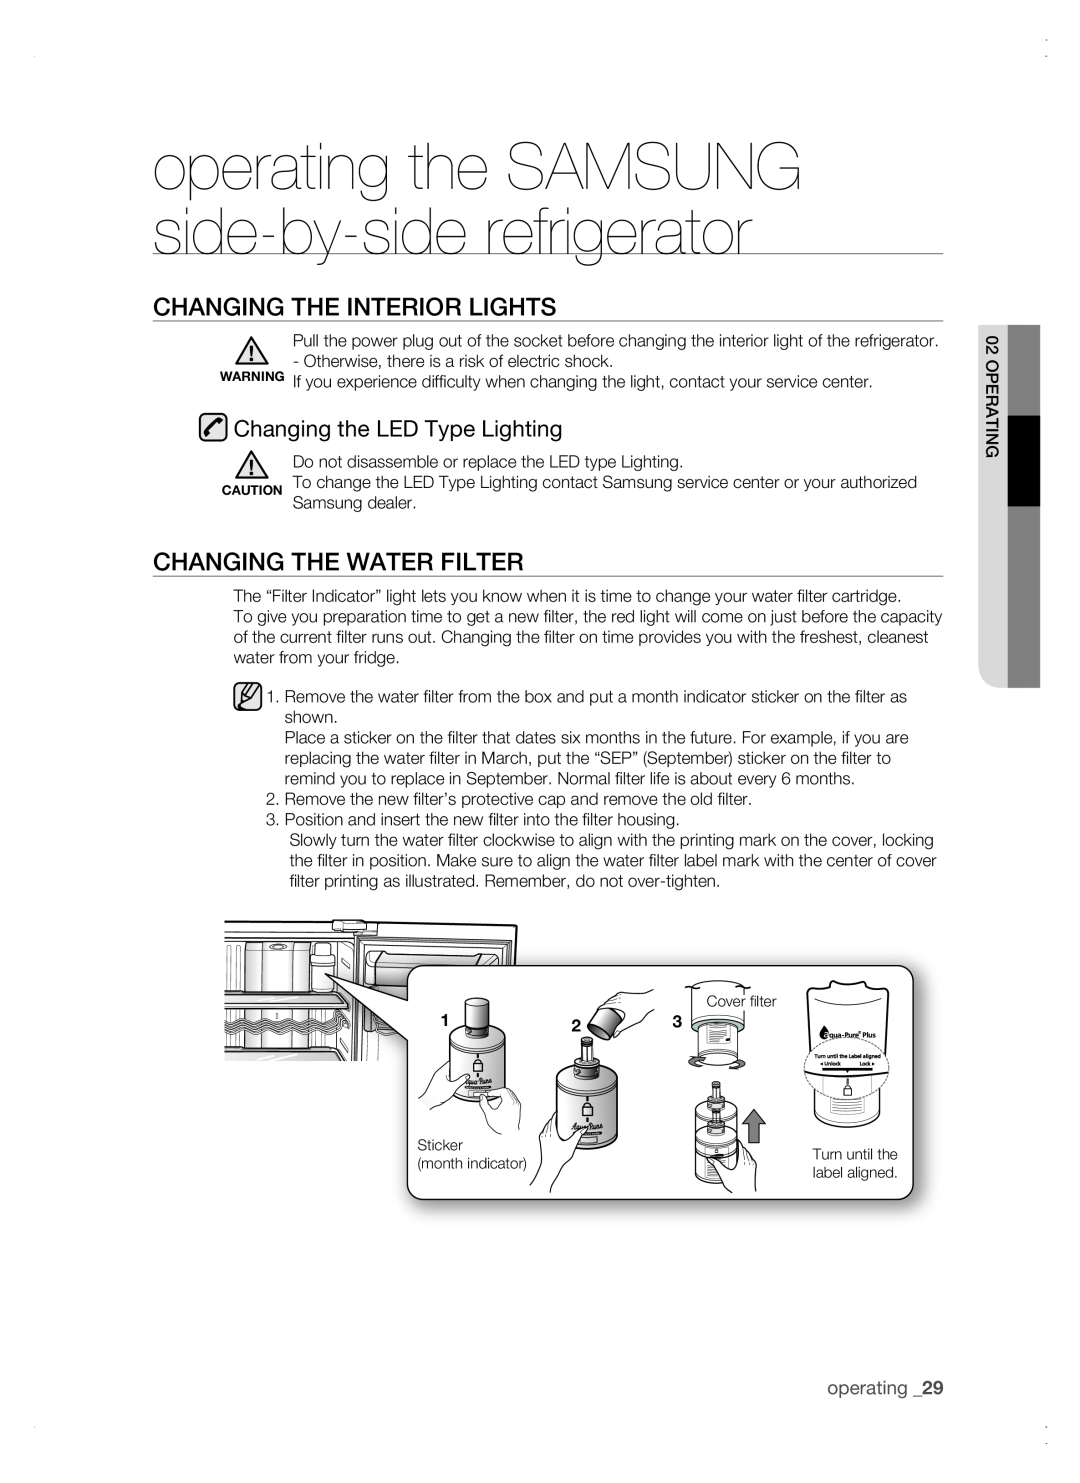 Samsung RSG5 user manual CHANGING the interior lights, Changing the WATER FILTER, Changing the LED Type Lighting, operating 